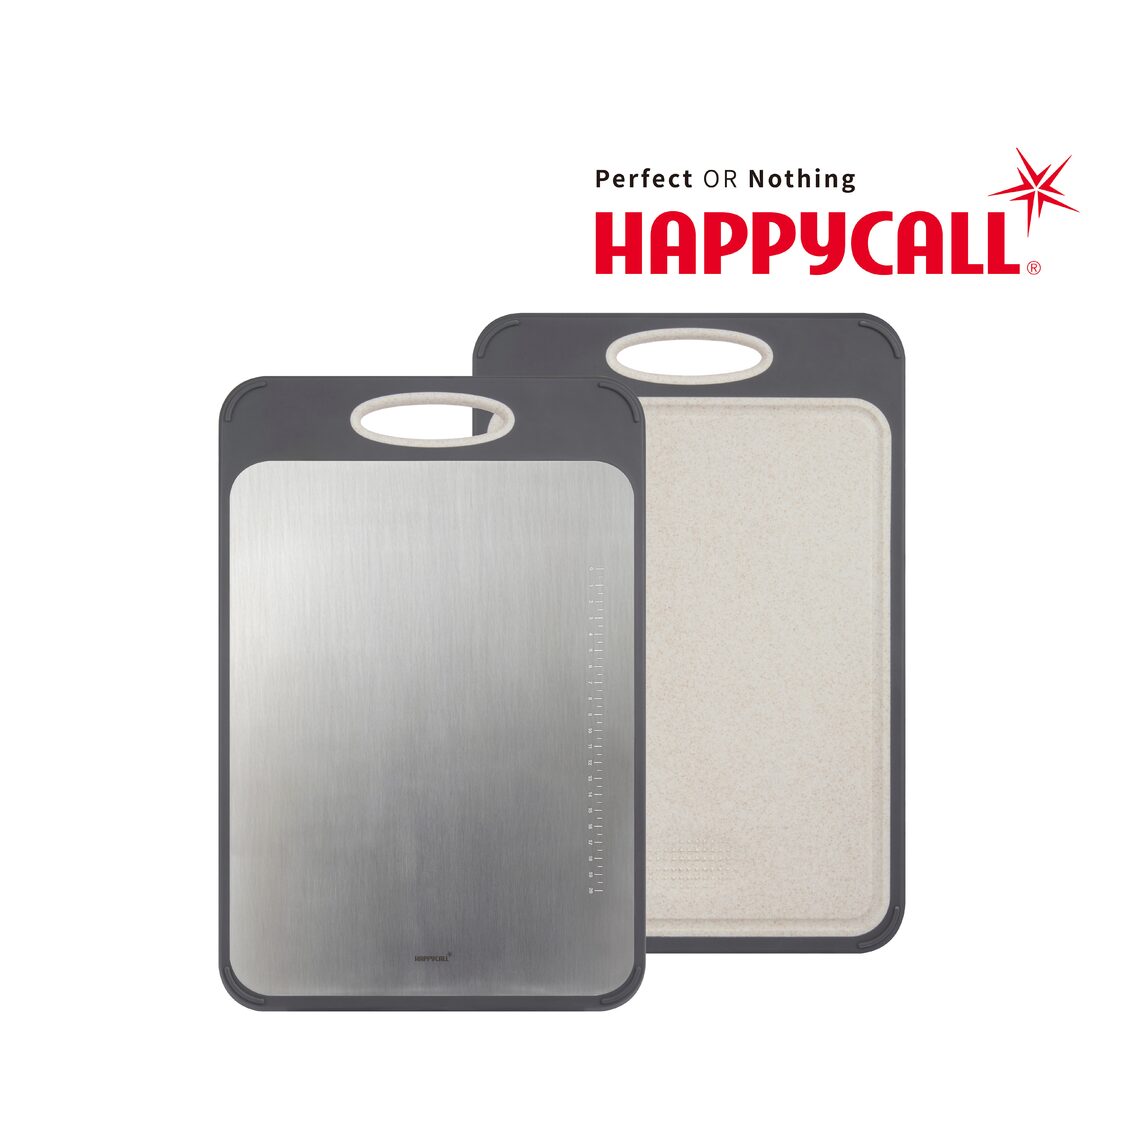 Happycall Cleanness Double-Sided Stainless Steel Cutting Board 4004-1054